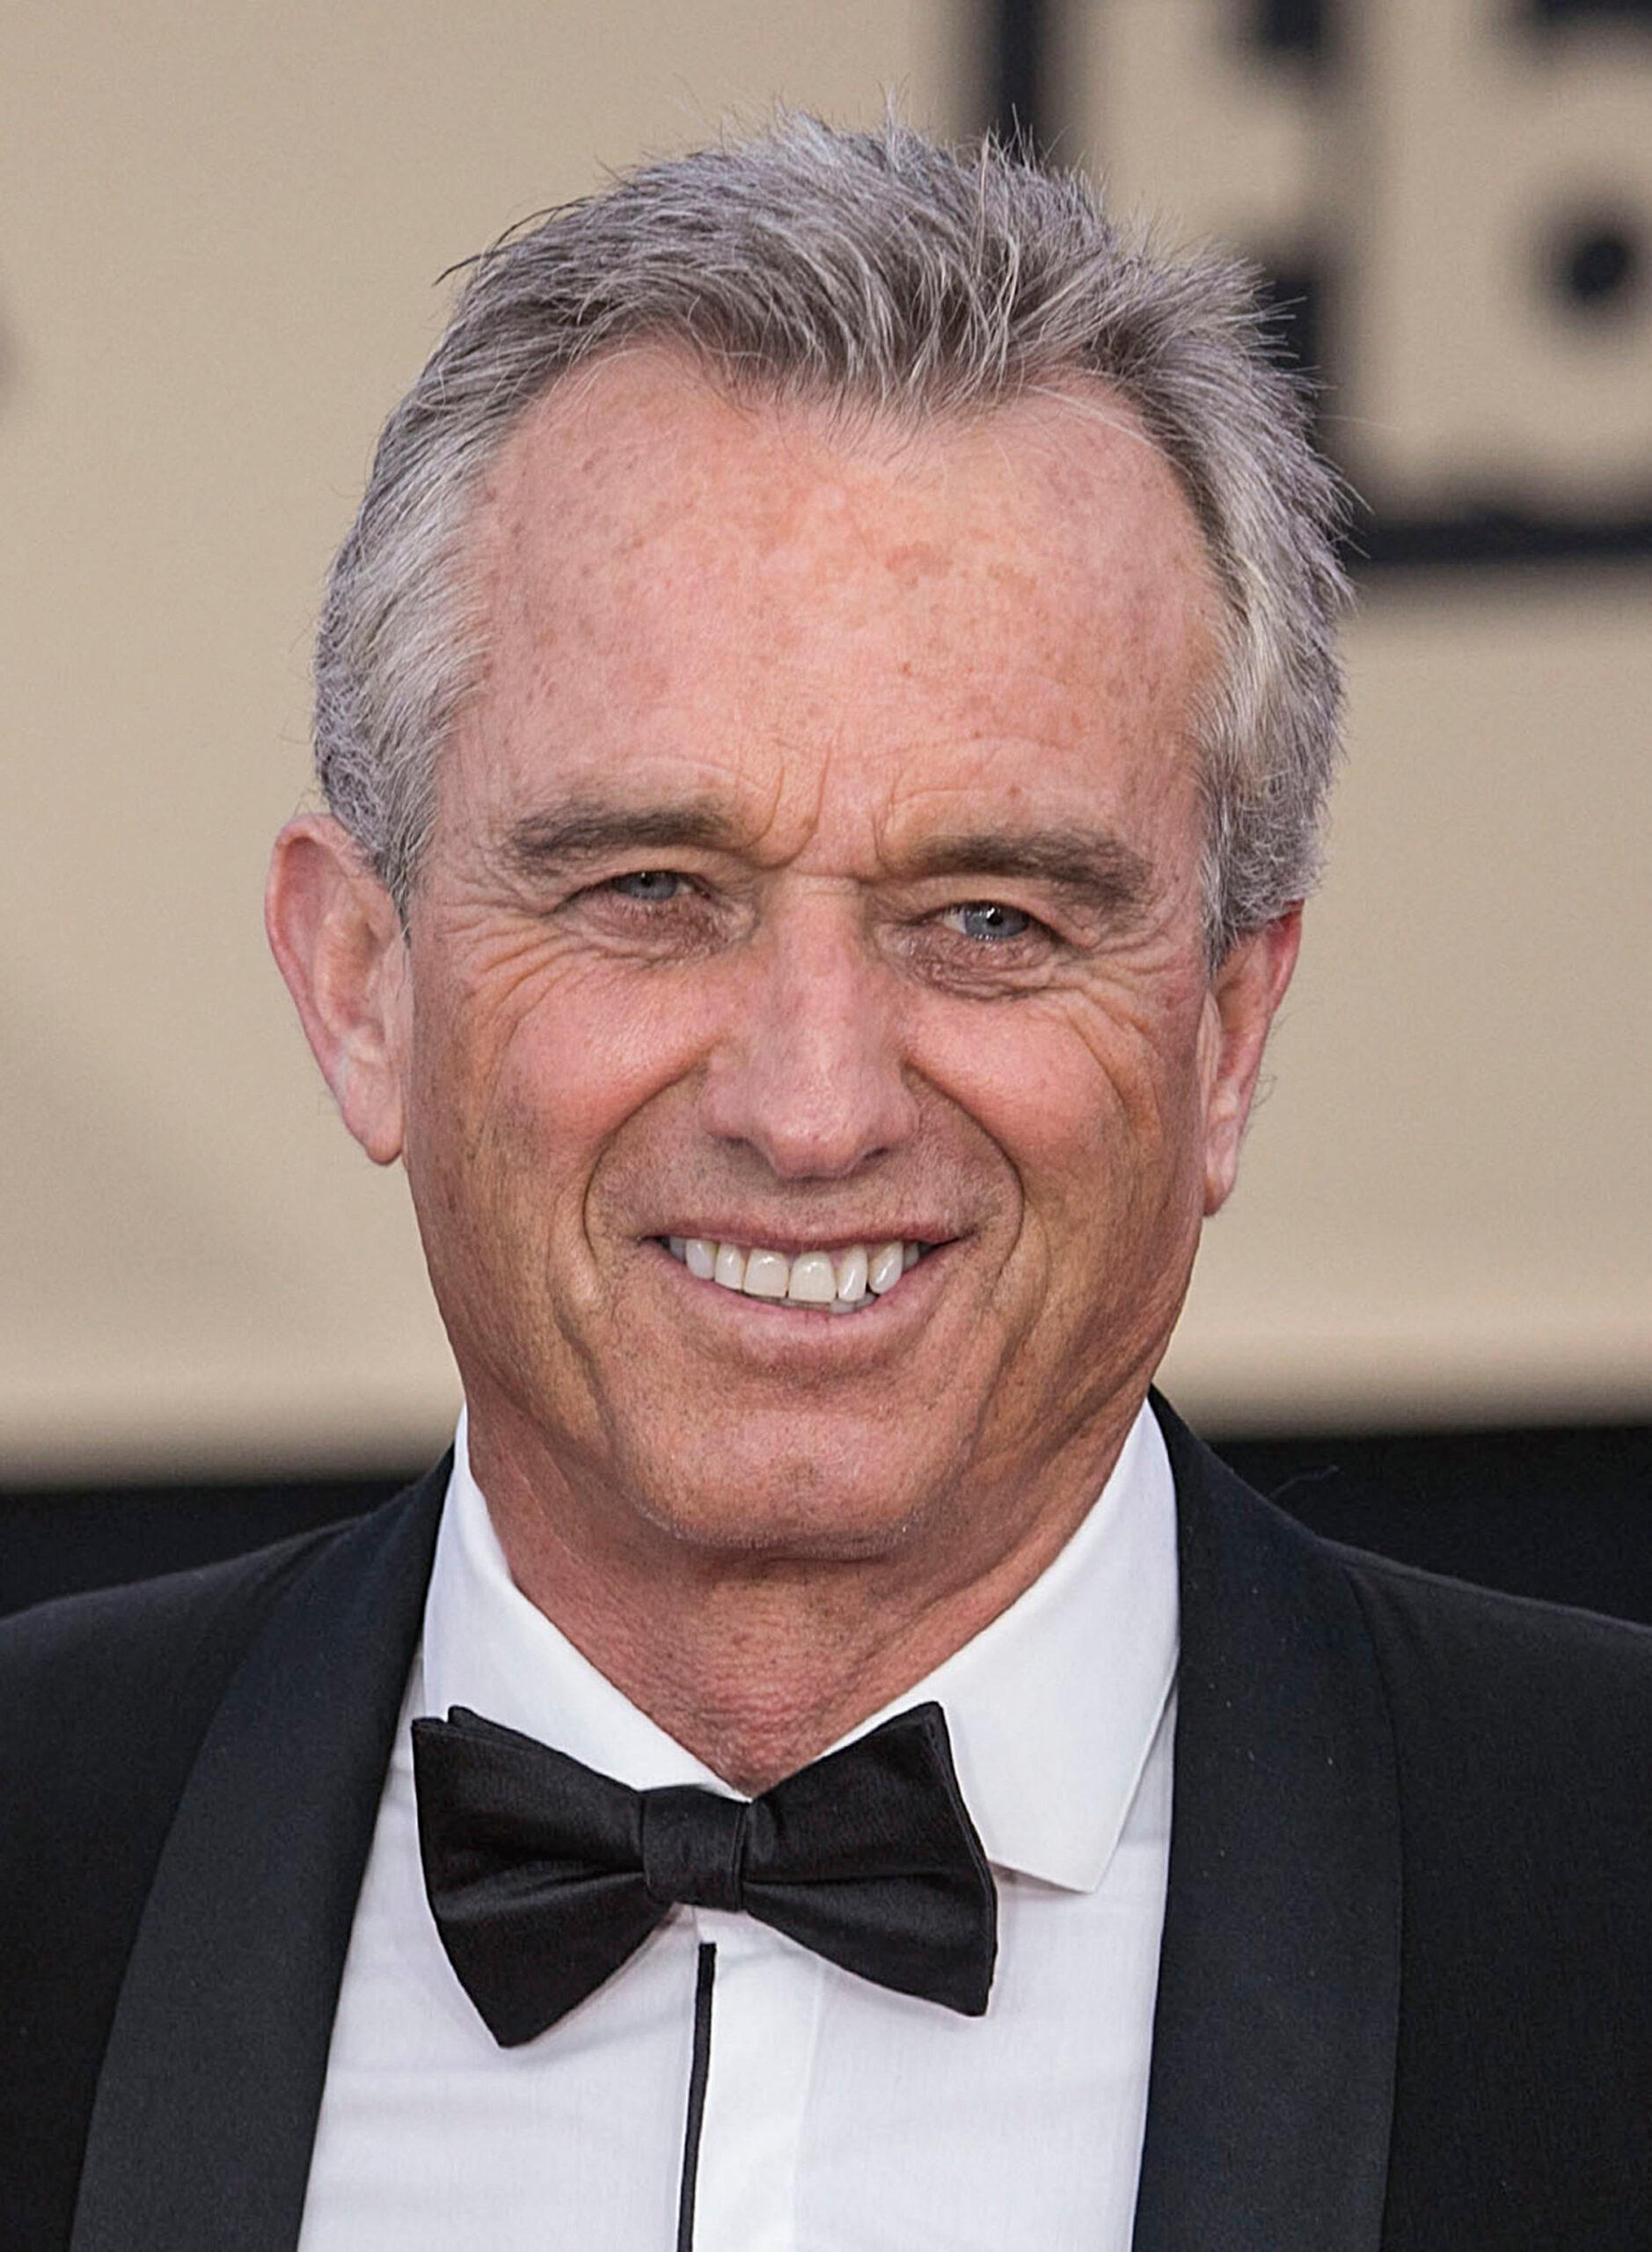 Robert F. Kennedy Jr. to Run for President in 2024